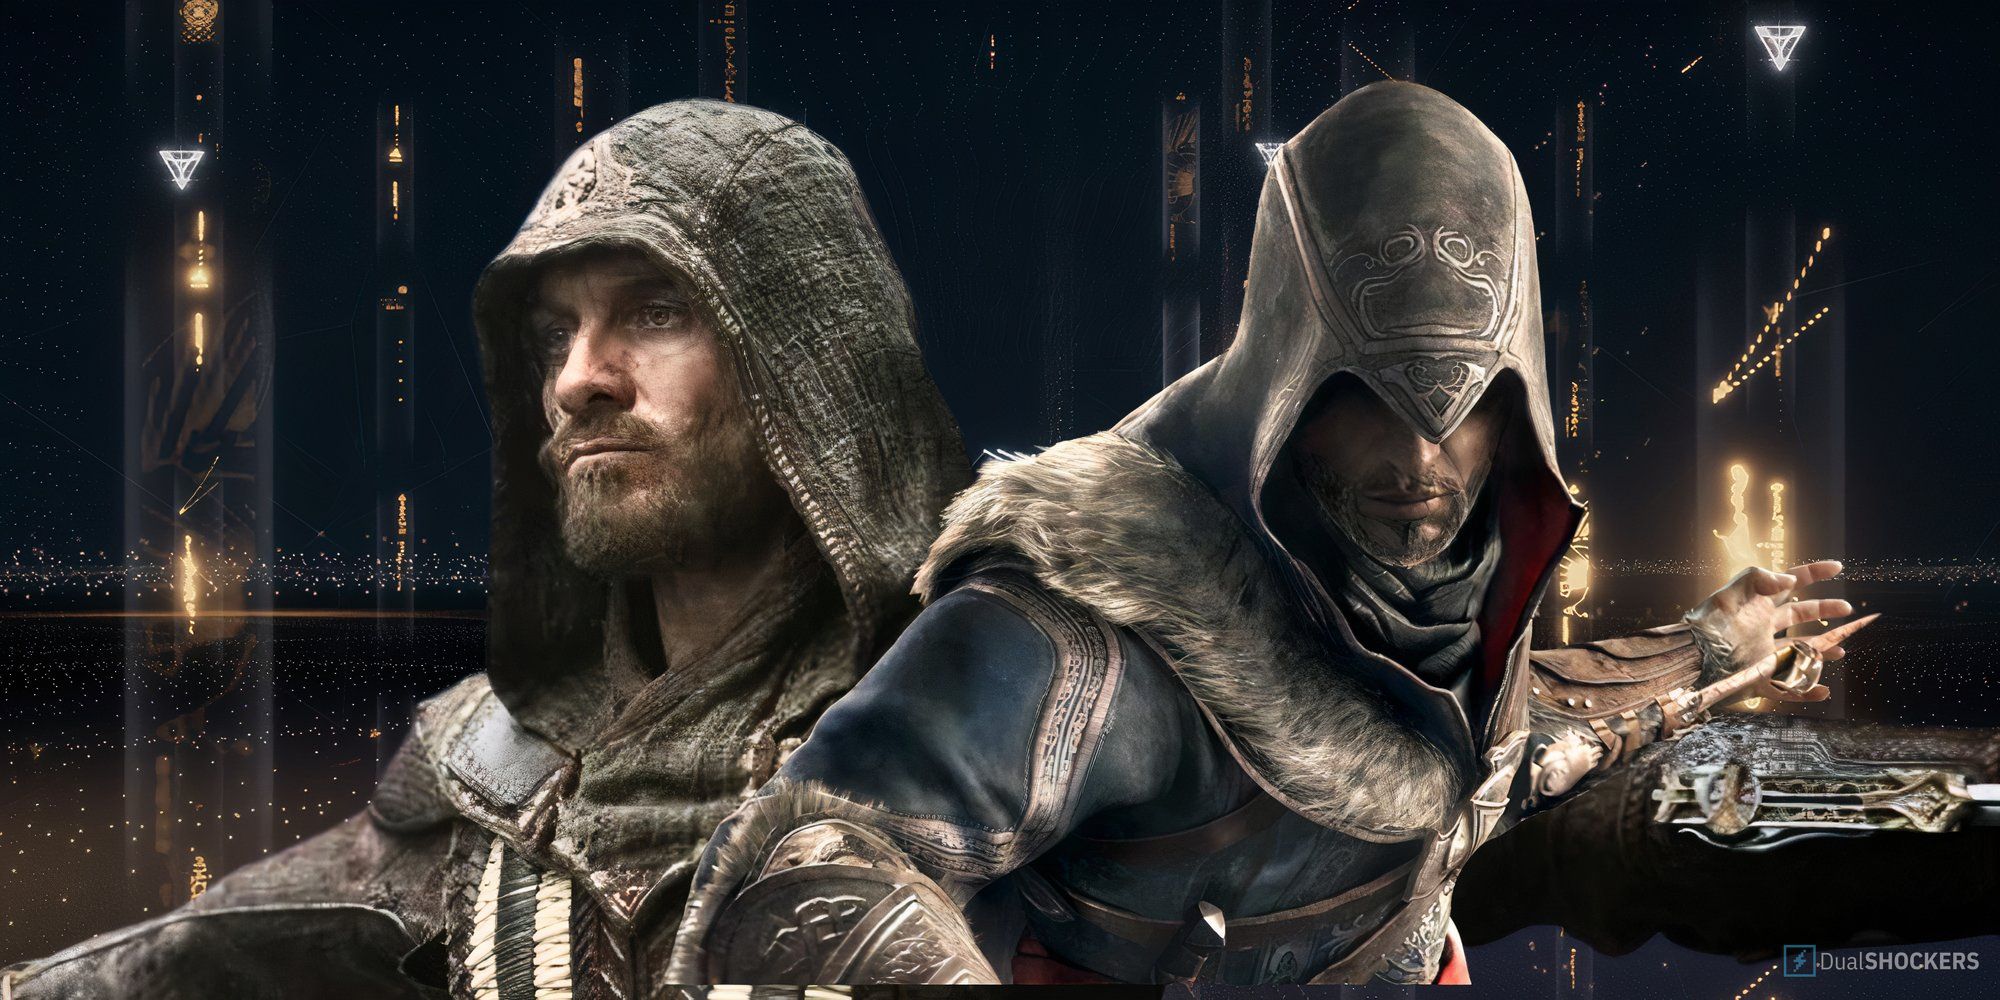 Feature image with Michael Fassbender's assassin and Ezio from Assassin's Creed Revelations.